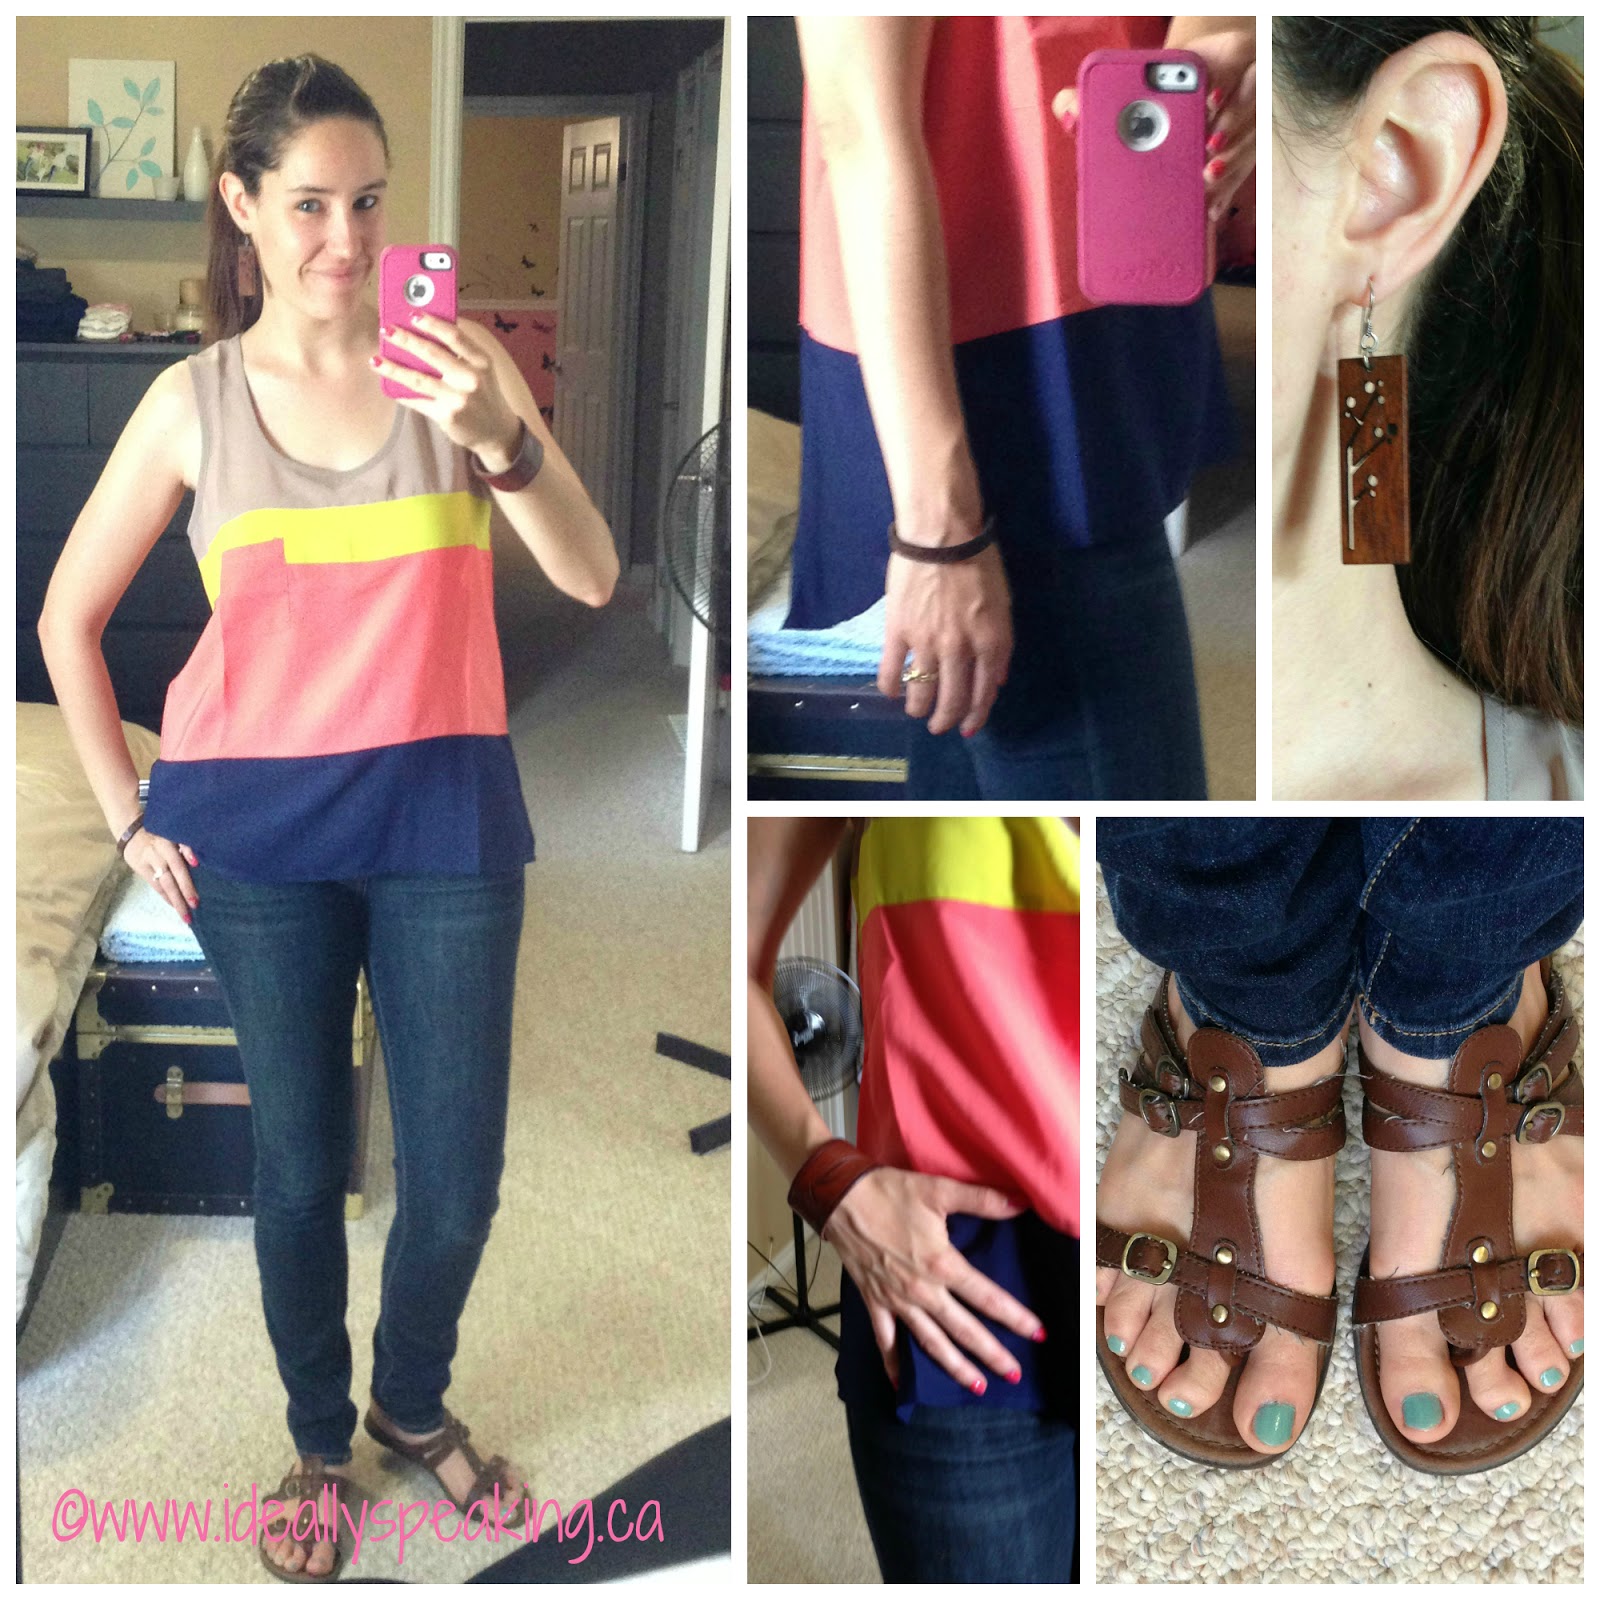 Loose Colour Blocking Tank - Great look for summer